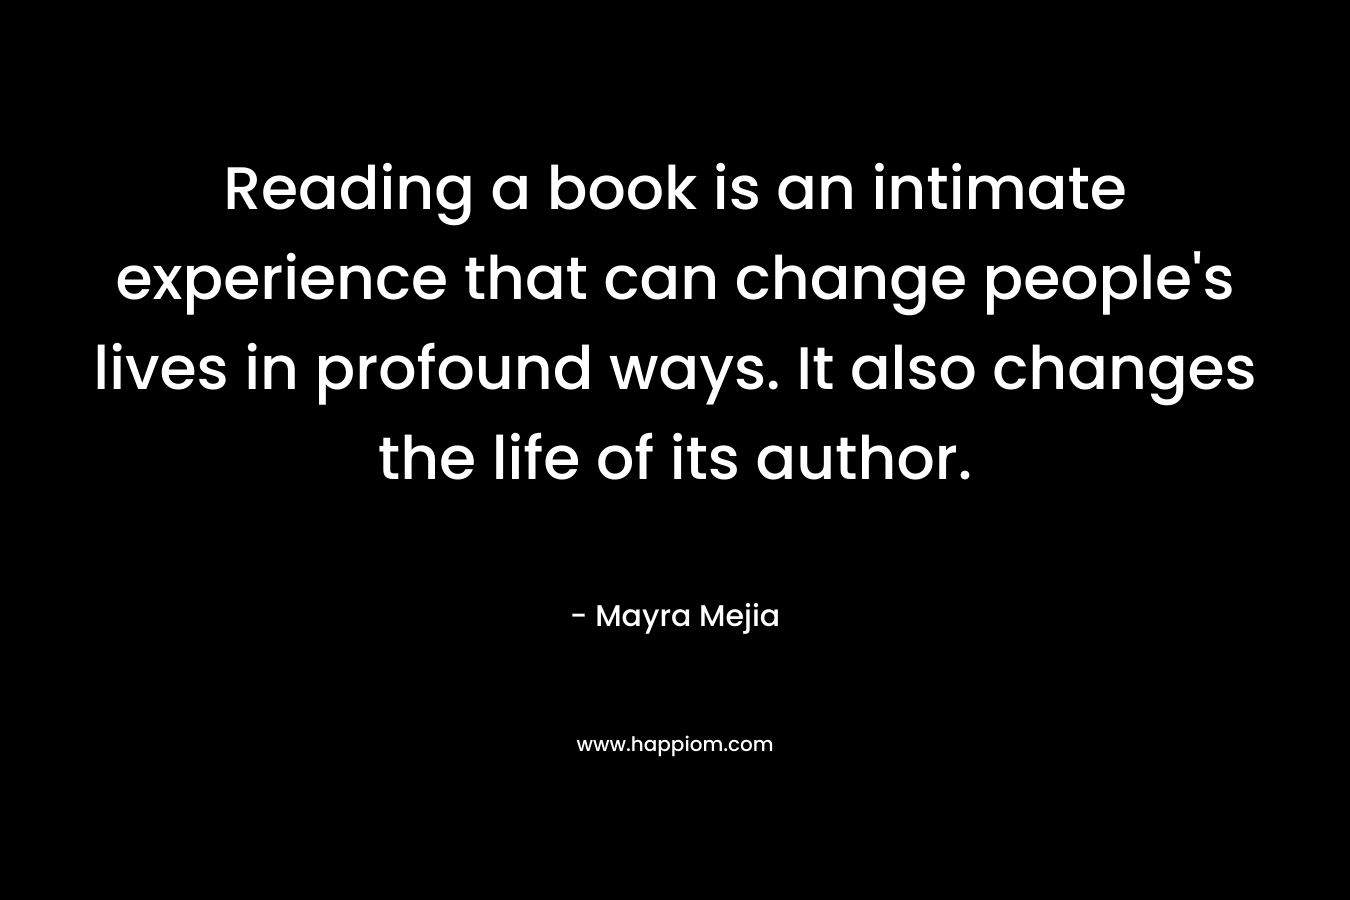 Reading a book is an intimate experience that can change people's lives in profound ways. It also changes the life of its author.